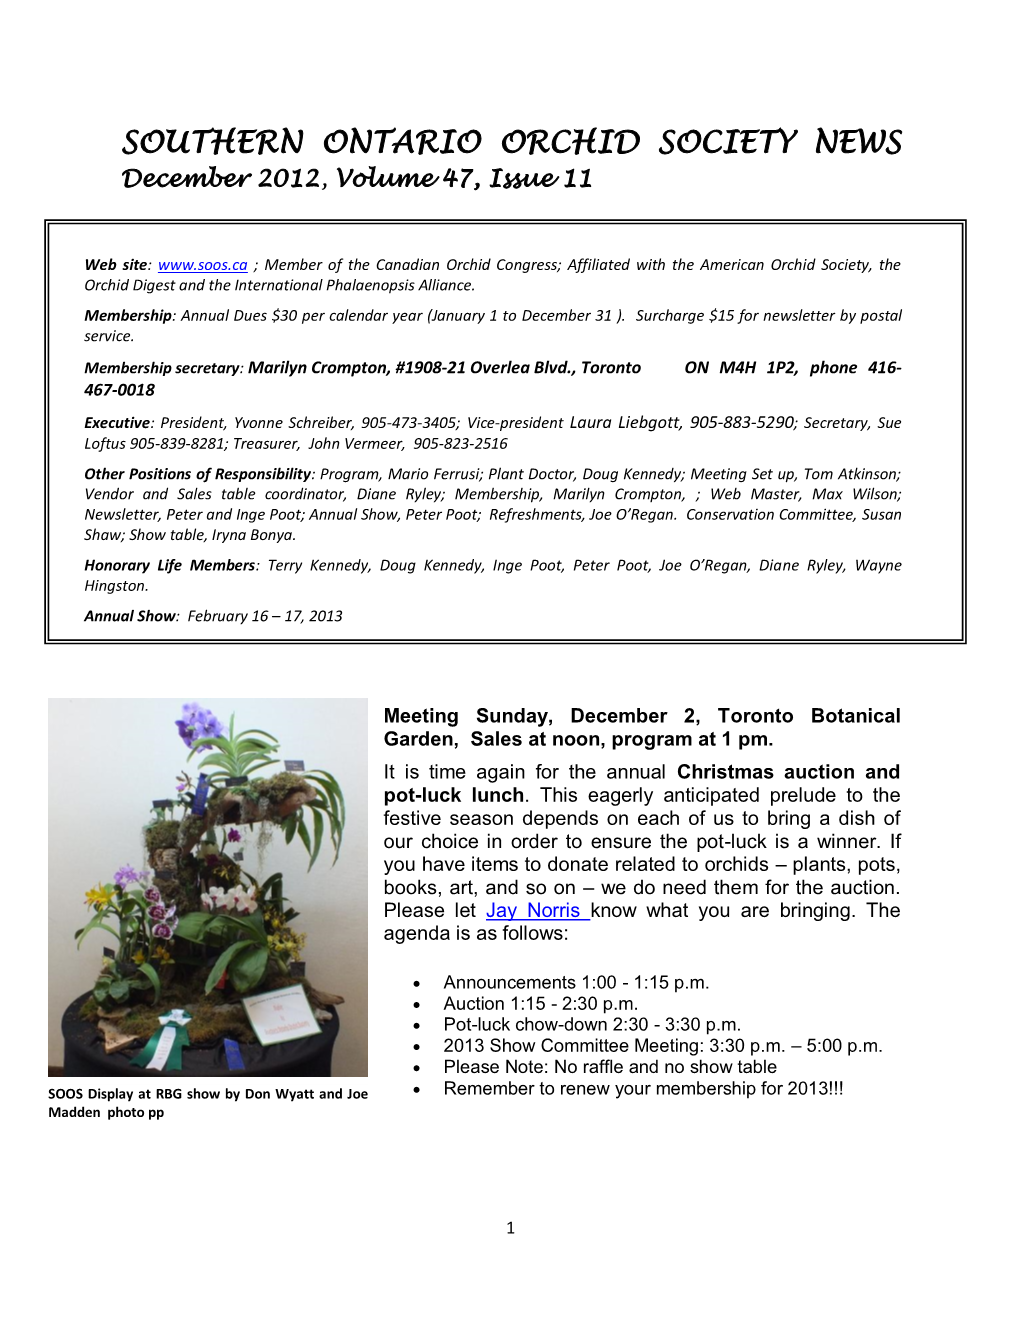 SOUTHERN ONTARIO ORCHID SOCIETY NEWS December 2012, Volume 47, Issue 11